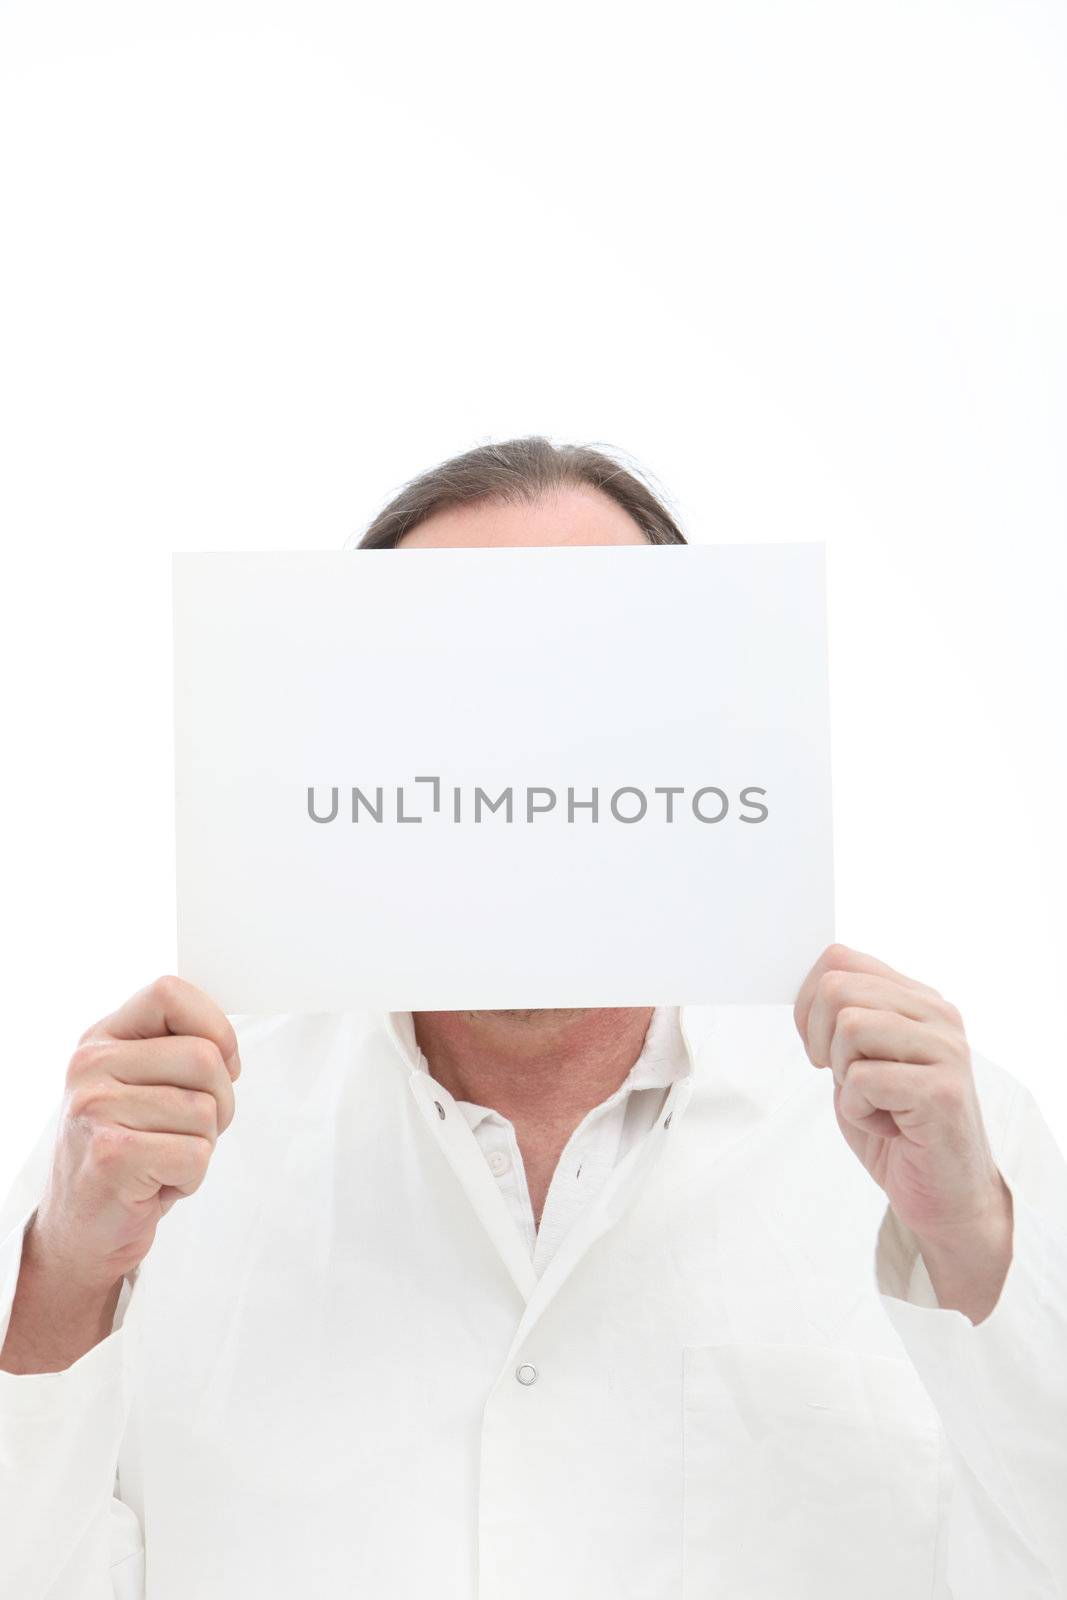 Man holding blank white paper with room for your text or message in front of his face